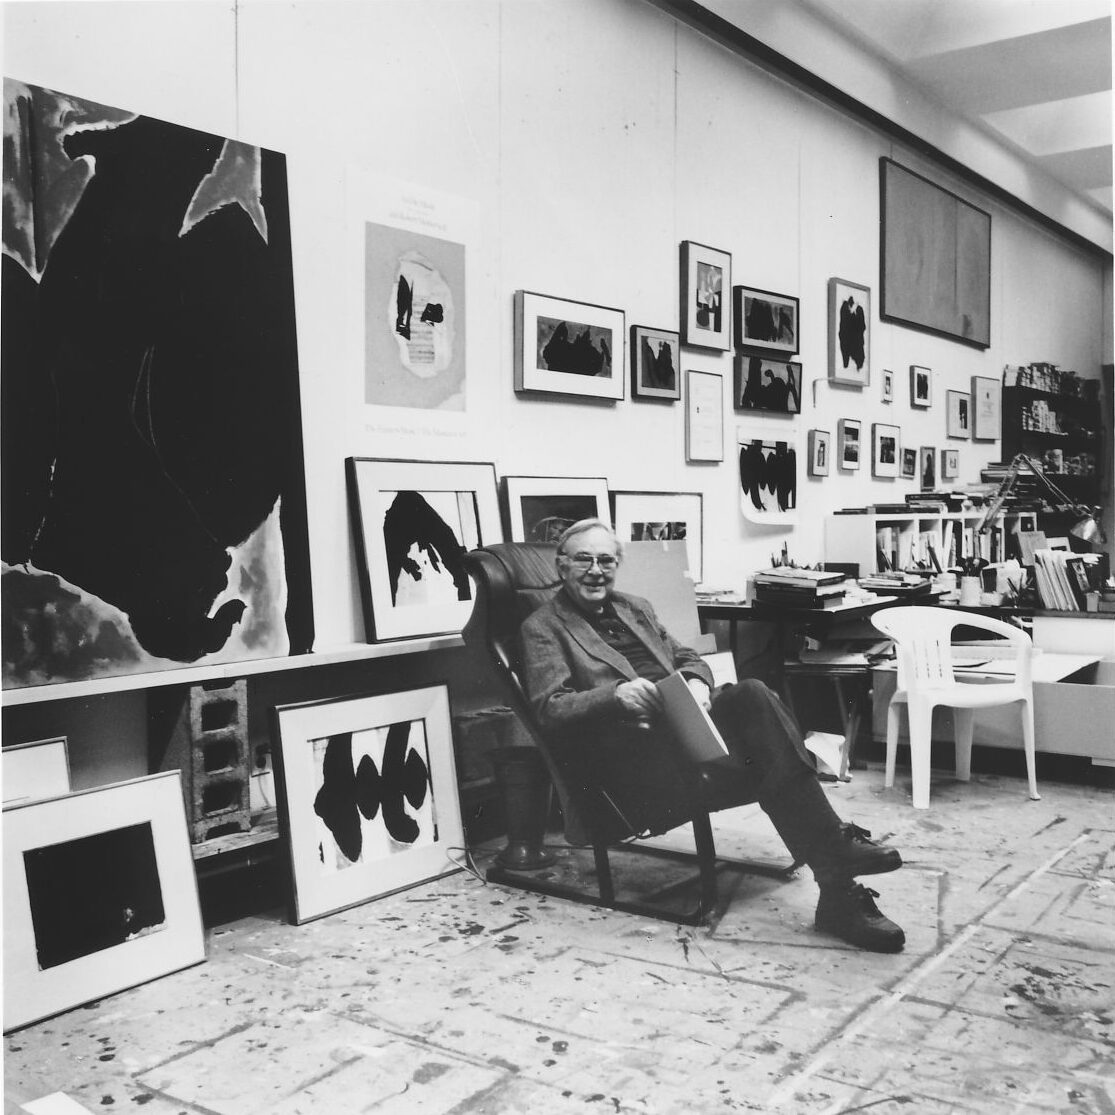 Robert Motherwell sitting in a chair in his studio